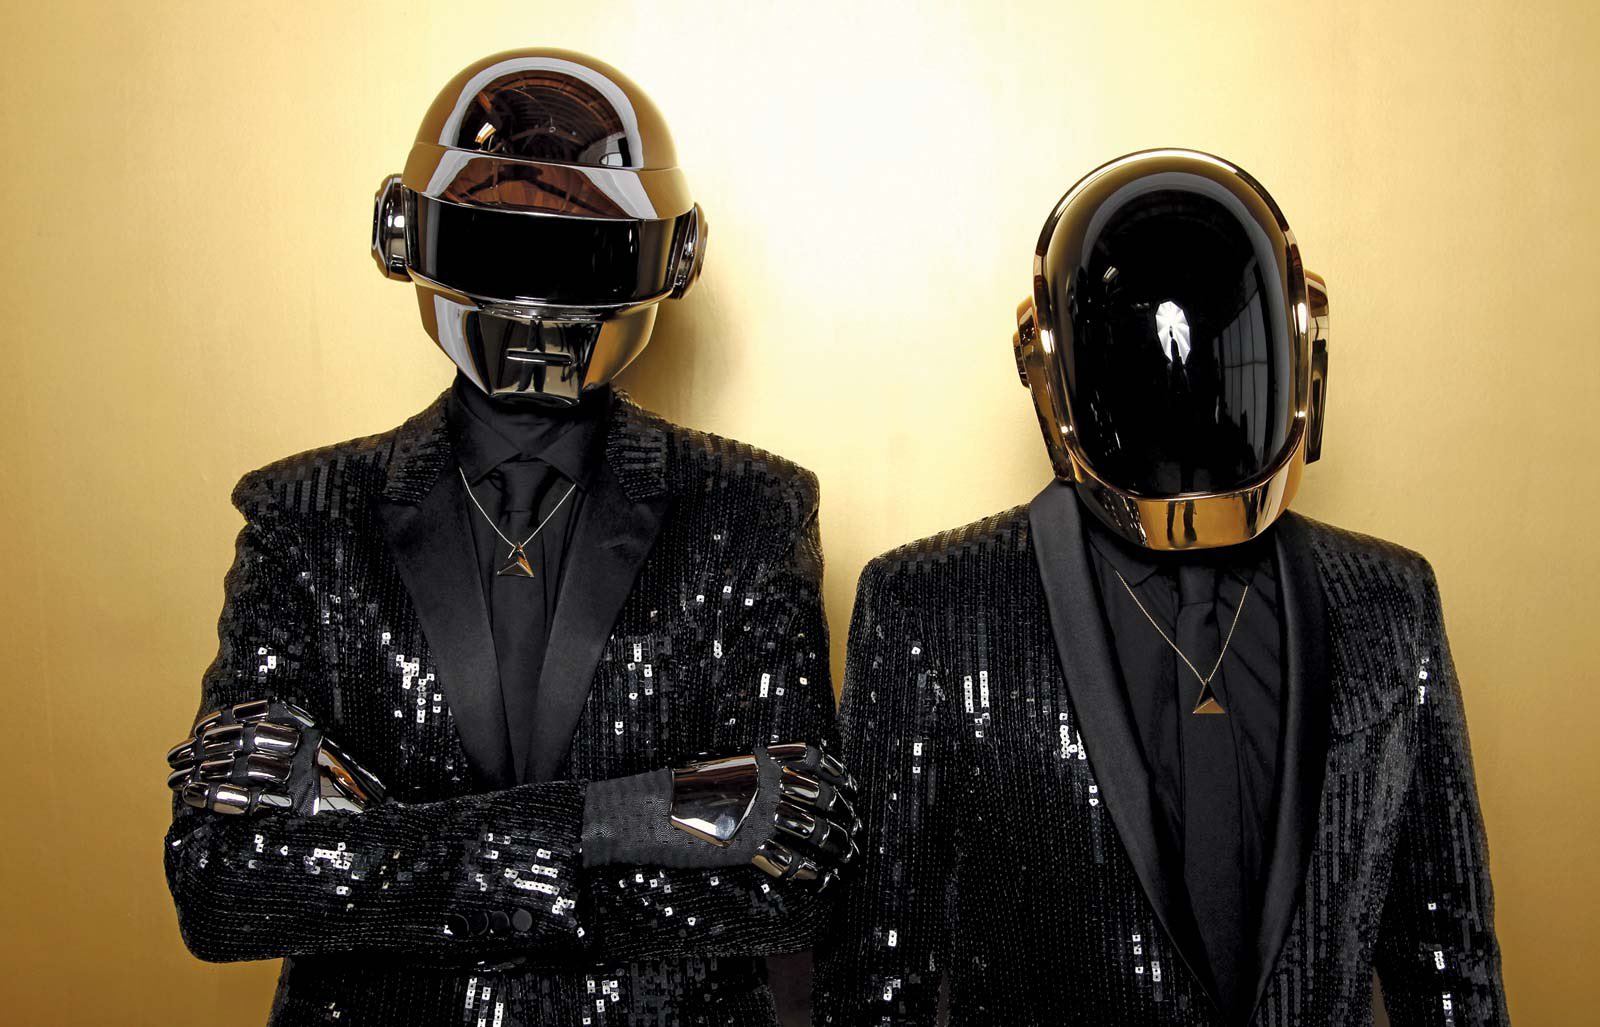 What Synthesizer Does Daft Punk Use